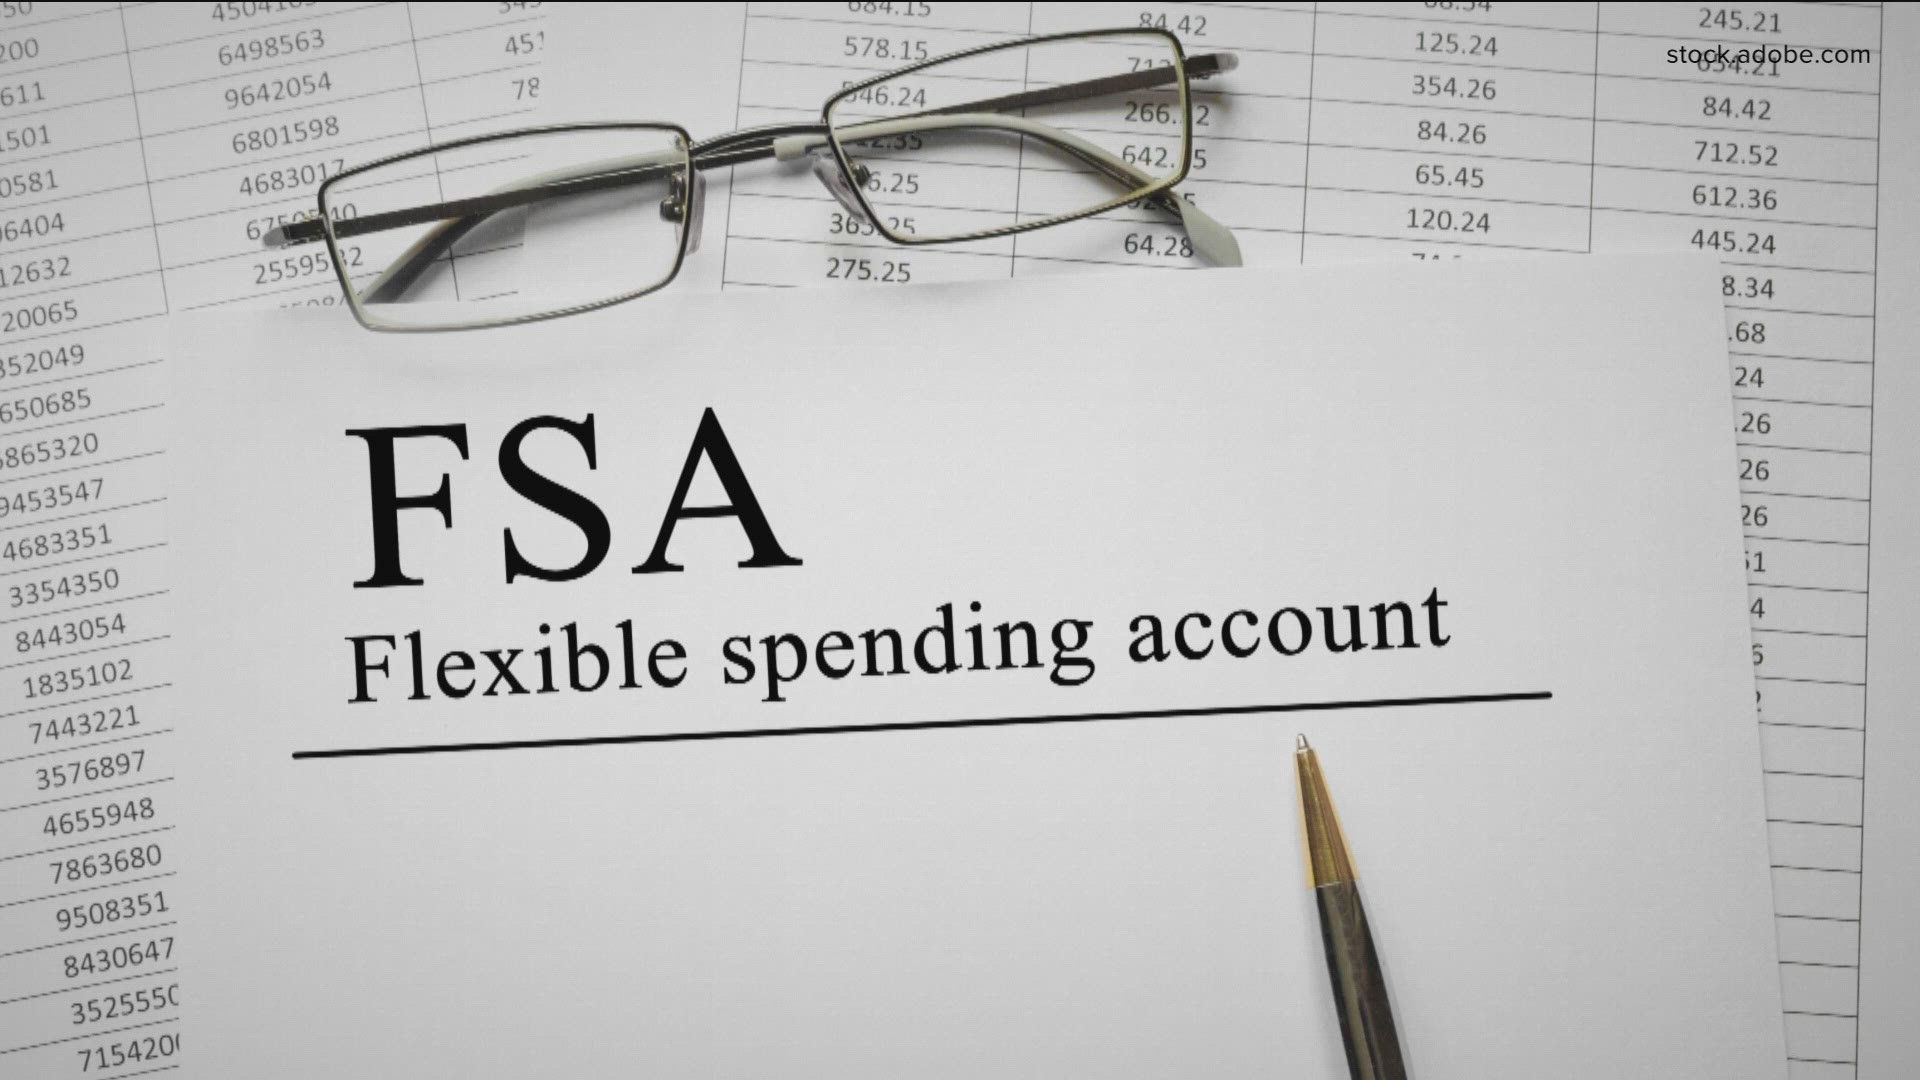 The deadline to spend FSA money is Sunday, Dec. 31, but many accounts have other options to help you avoid losing money.